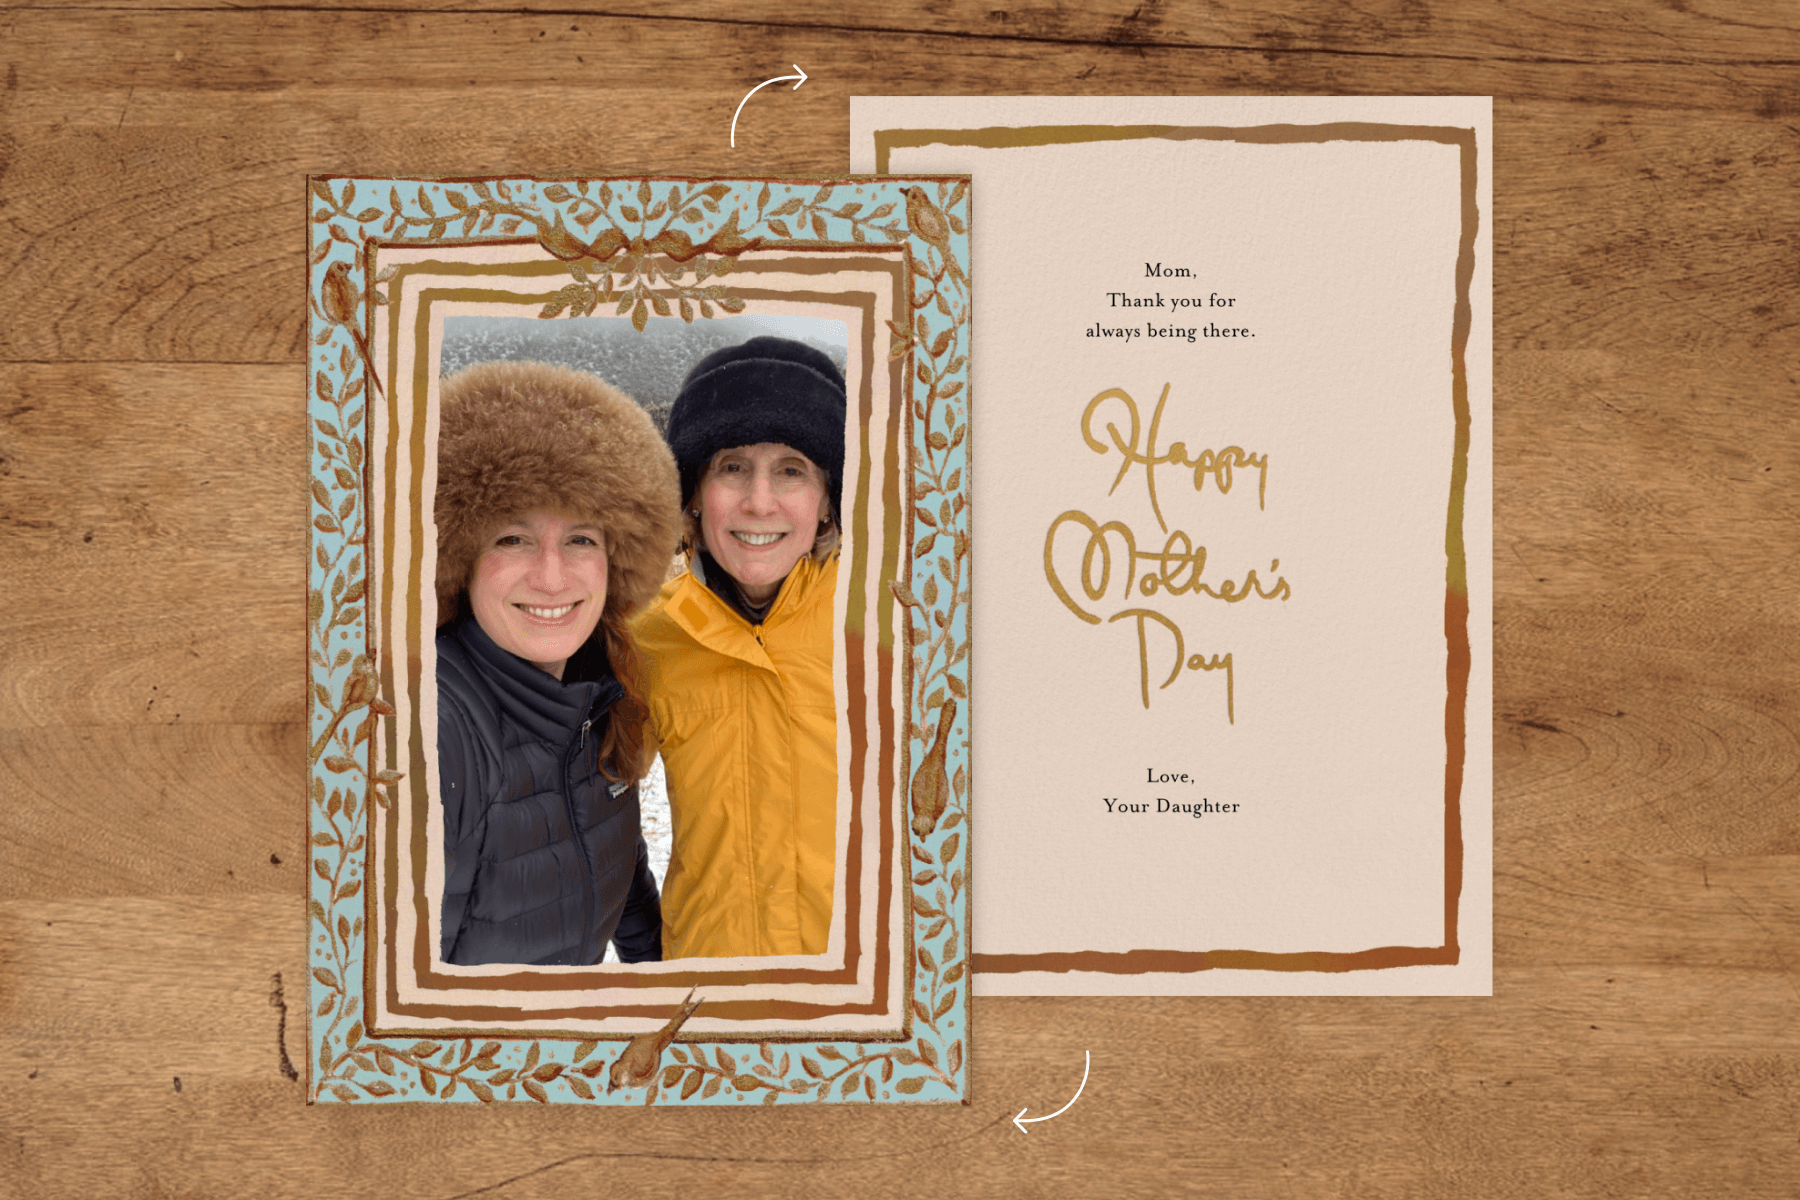 A Mother’s Day card with a color photo of Happy Menocal and her mother, Katharine Barnwell, in winter clothing in a light blue and gold frame border, as well as the reverse with a personal message.